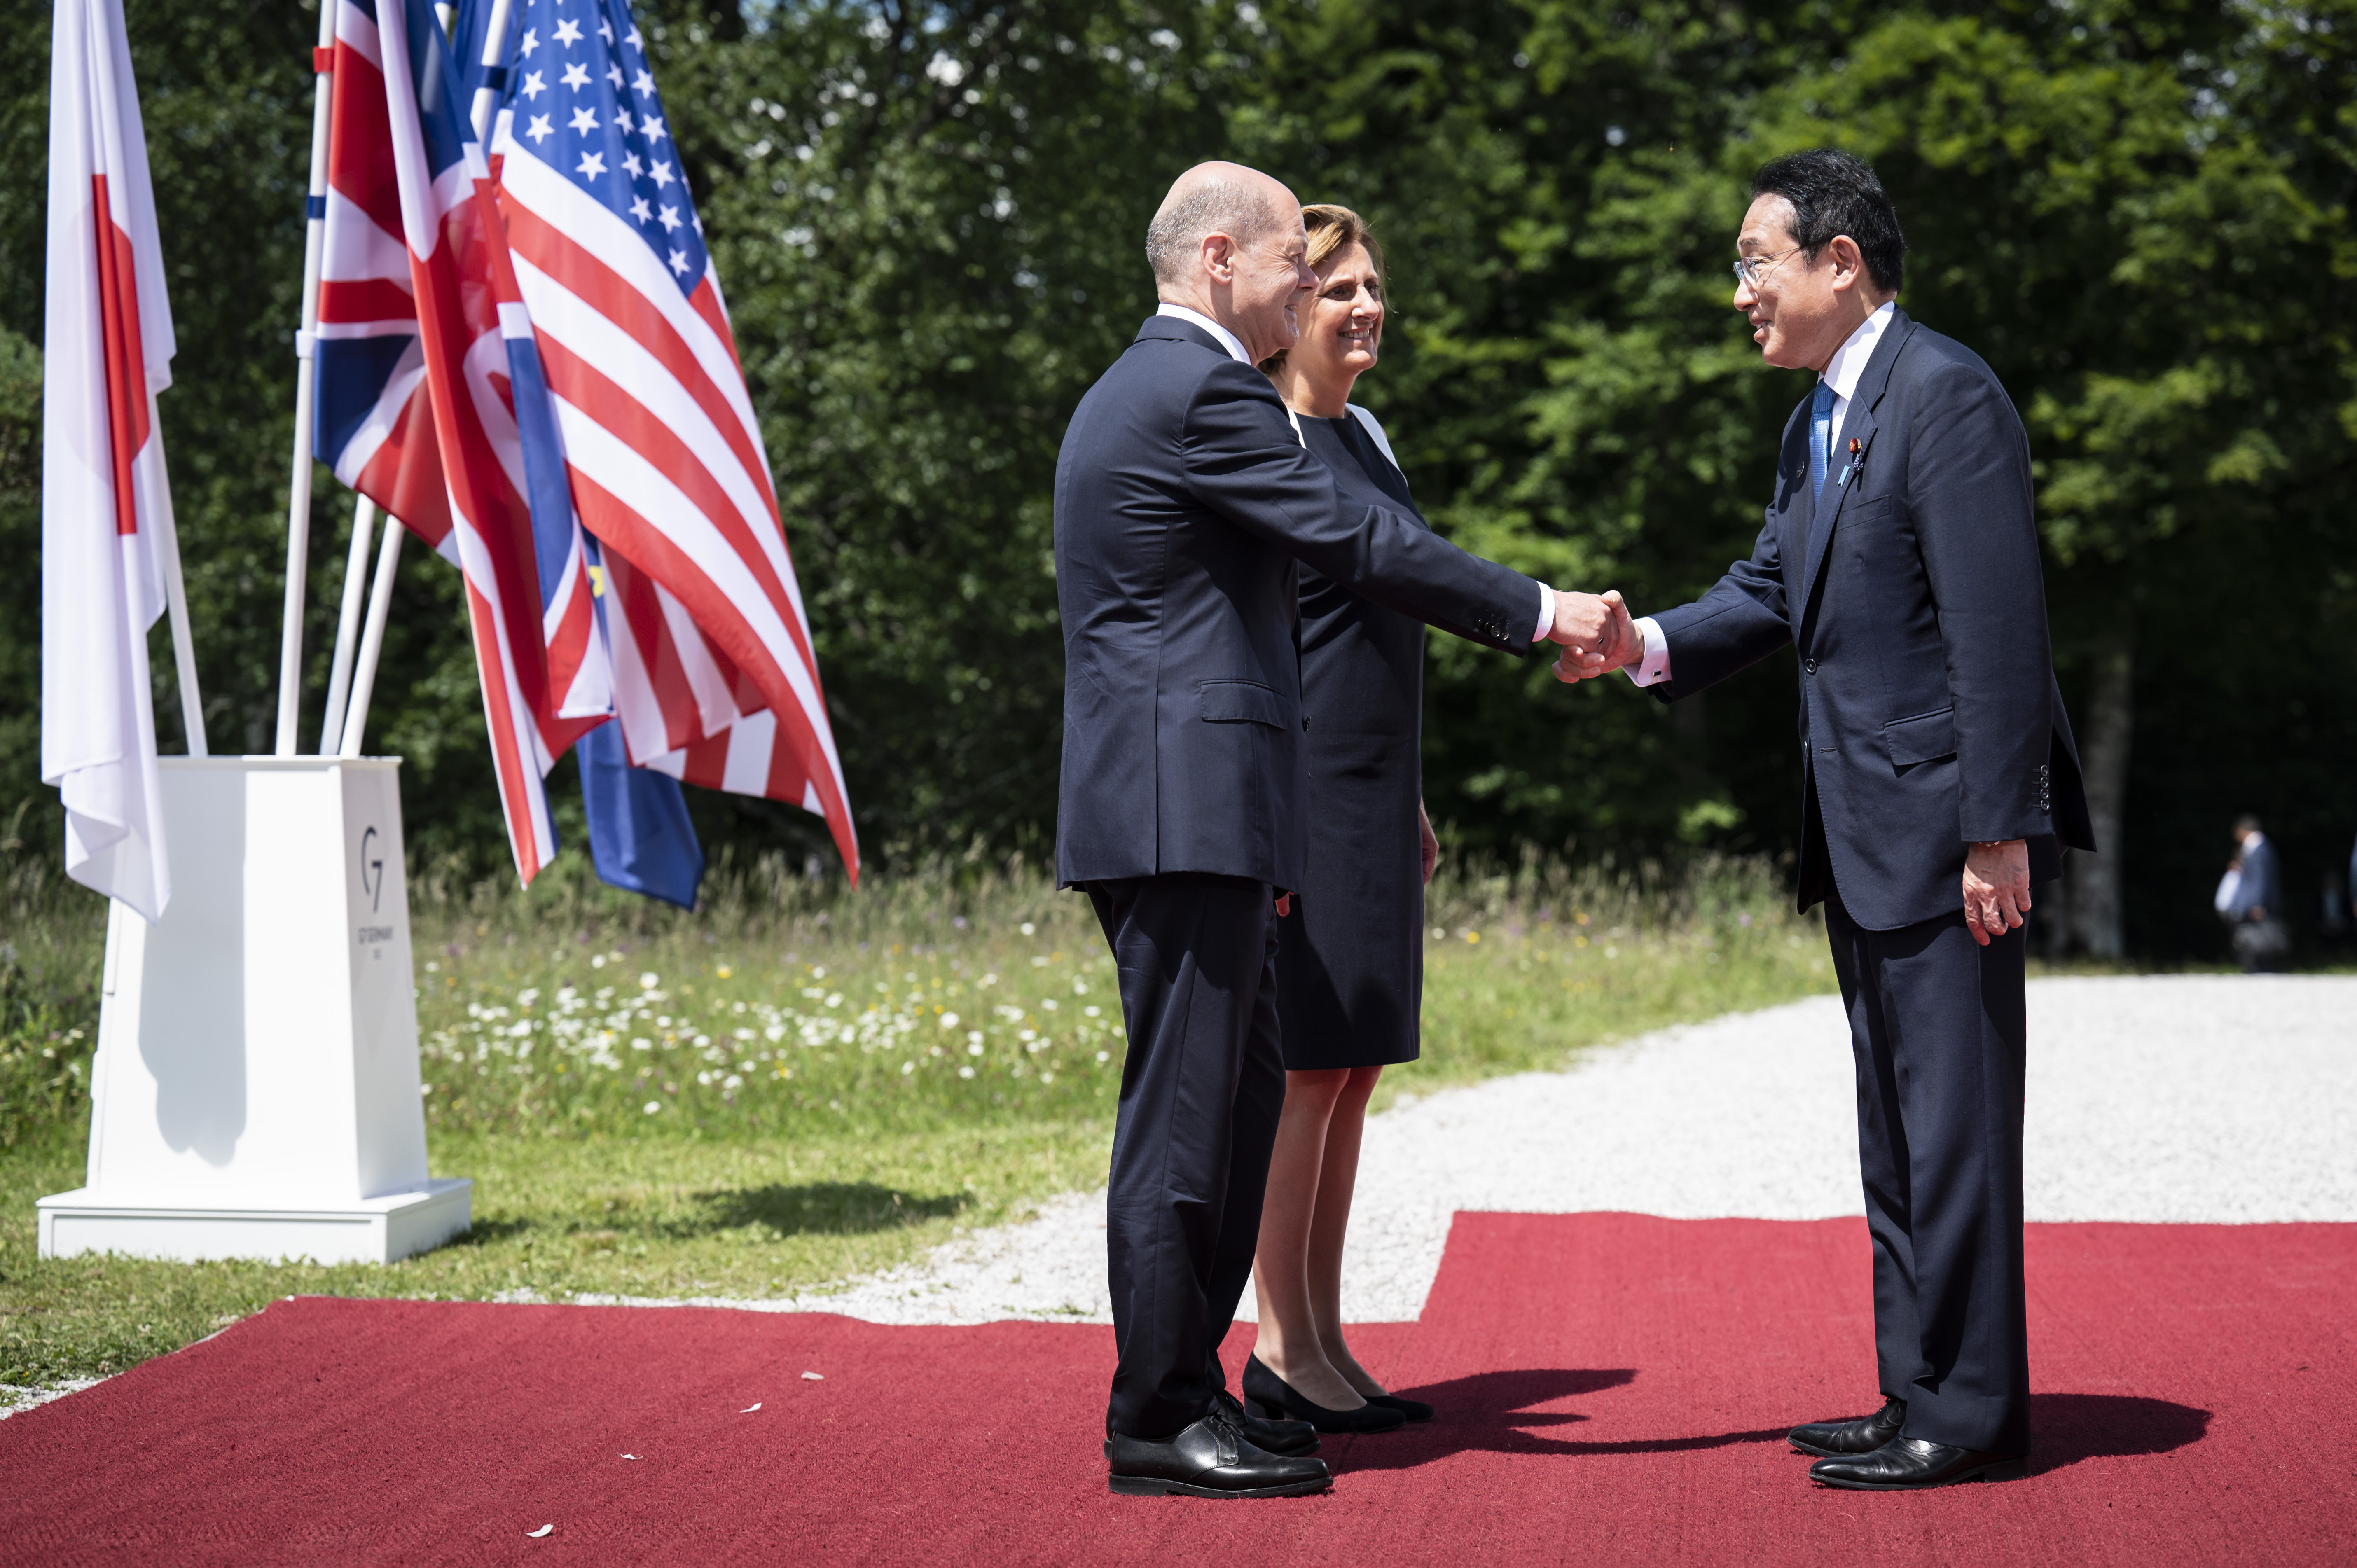 Federal Chancellor Olaf Scholz and his wife Britta Ernst welcome Fumio Kishida (Prime Minister of Japan) to the G7 Summit in Schloss Elmau.